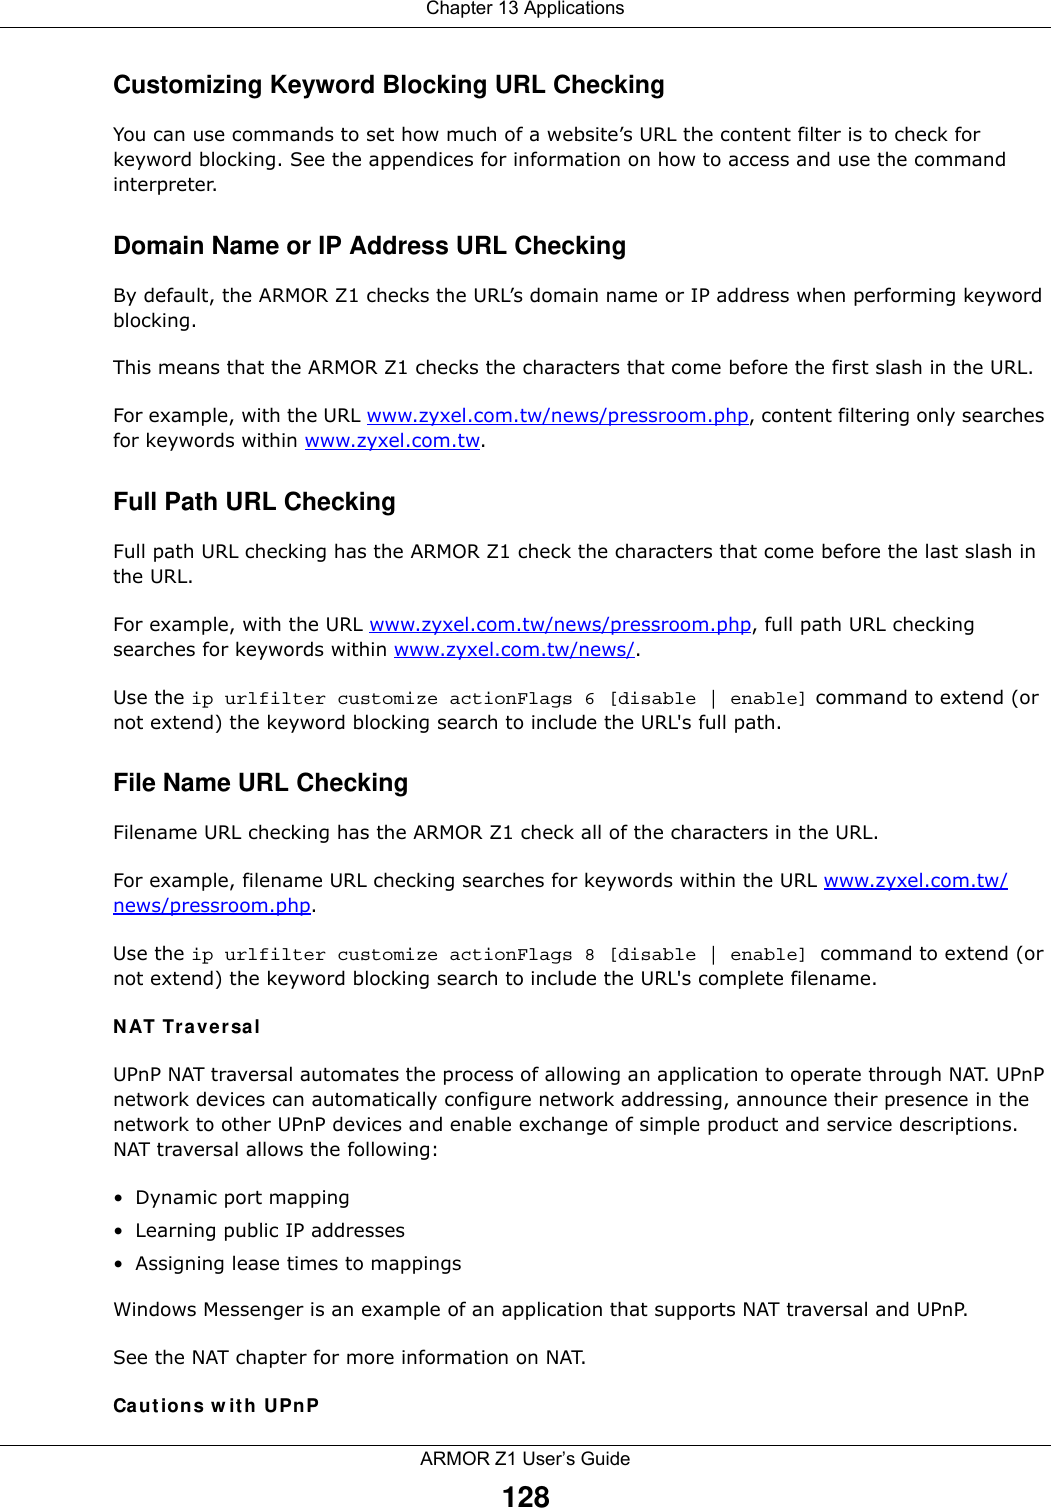 Chapter 13 ApplicationsARMOR Z1 User’s Guide128Customizing Keyword Blocking URL CheckingYou can use commands to set how much of a website’s URL the content filter is to check for keyword blocking. See the appendices for information on how to access and use the command interpreter.Domain Name or IP Address URL CheckingBy default, the ARMOR Z1 checks the URL’s domain name or IP address when performing keyword blocking.This means that the ARMOR Z1 checks the characters that come before the first slash in the URL.For example, with the URL www.zyxel.com.tw/news/pressroom.php, content filtering only searches for keywords within www.zyxel.com.tw.Full Path URL CheckingFull path URL checking has the ARMOR Z1 check the characters that come before the last slash in the URL.For example, with the URL www.zyxel.com.tw/news/pressroom.php, full path URL checking searches for keywords within www.zyxel.com.tw/news/.Use the ip urlfilter customize actionFlags 6 [disable | enable] command to extend (or not extend) the keyword blocking search to include the URL&apos;s full path.File Name URL CheckingFilename URL checking has the ARMOR Z1 check all of the characters in the URL.For example, filename URL checking searches for keywords within the URL www.zyxel.com.tw/news/pressroom.php.Use the ip urlfilter customize actionFlags 8 [disable | enable] command to extend (or not extend) the keyword blocking search to include the URL&apos;s complete filename.NAT TraversalUPnP NAT traversal automates the process of allowing an application to operate through NAT. UPnP network devices can automatically configure network addressing, announce their presence in the network to other UPnP devices and enable exchange of simple product and service descriptions. NAT traversal allows the following:• Dynamic port mapping• Learning public IP addresses• Assigning lease times to mappingsWindows Messenger is an example of an application that supports NAT traversal and UPnP. See the NAT chapter for more information on NAT.Cautions with UPnP